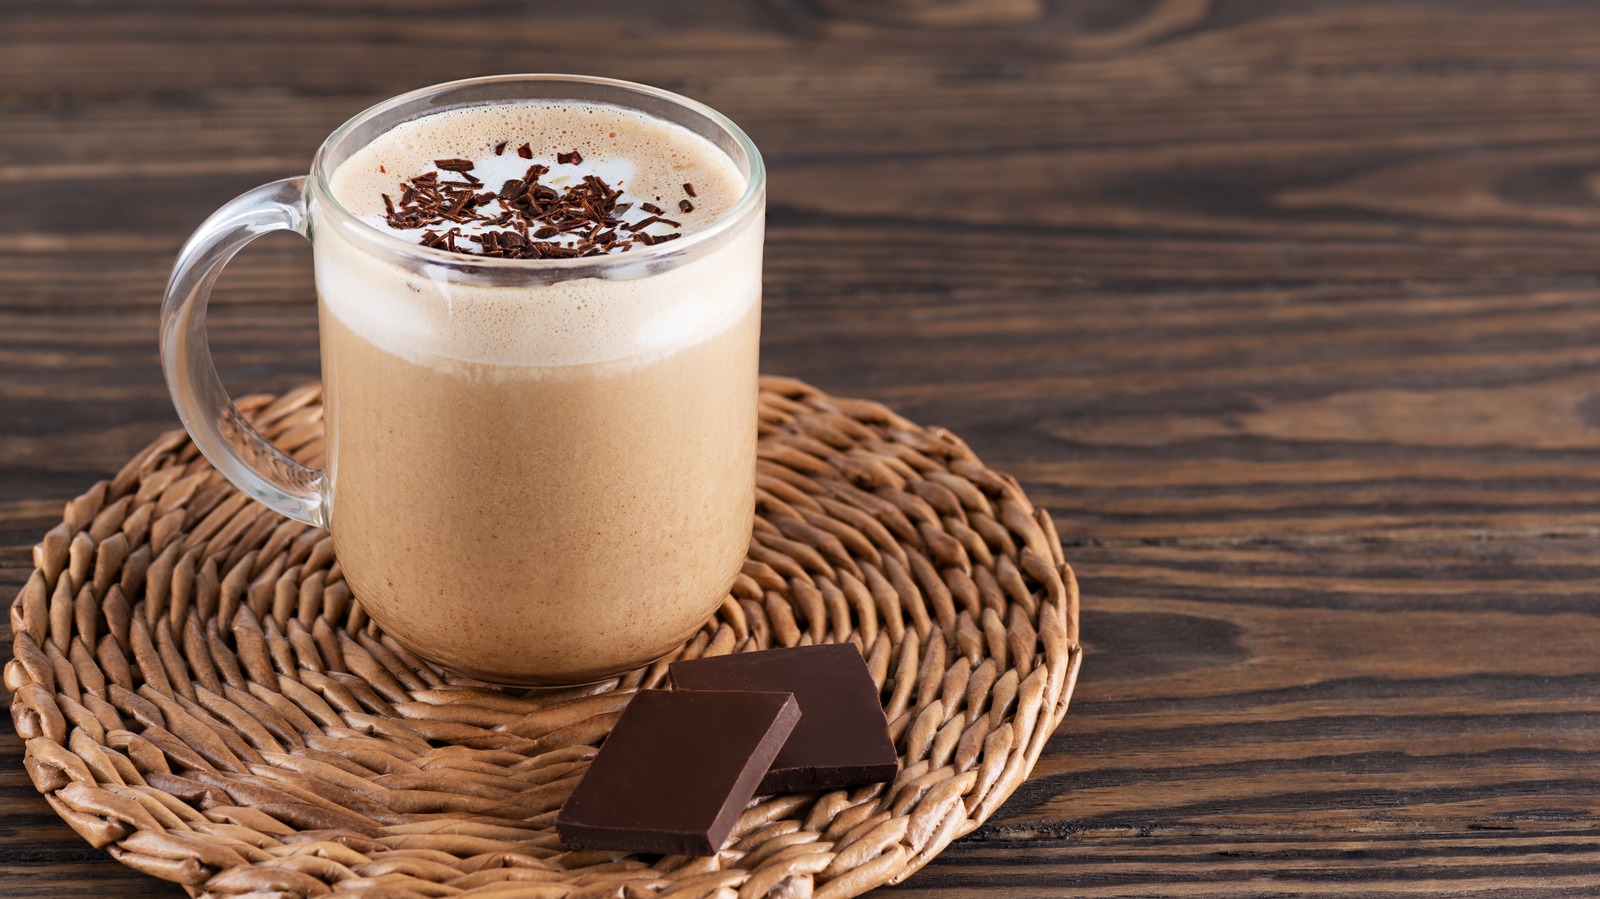 The Classic Mocha Is A Coffee Shop Staple, But What Is It?